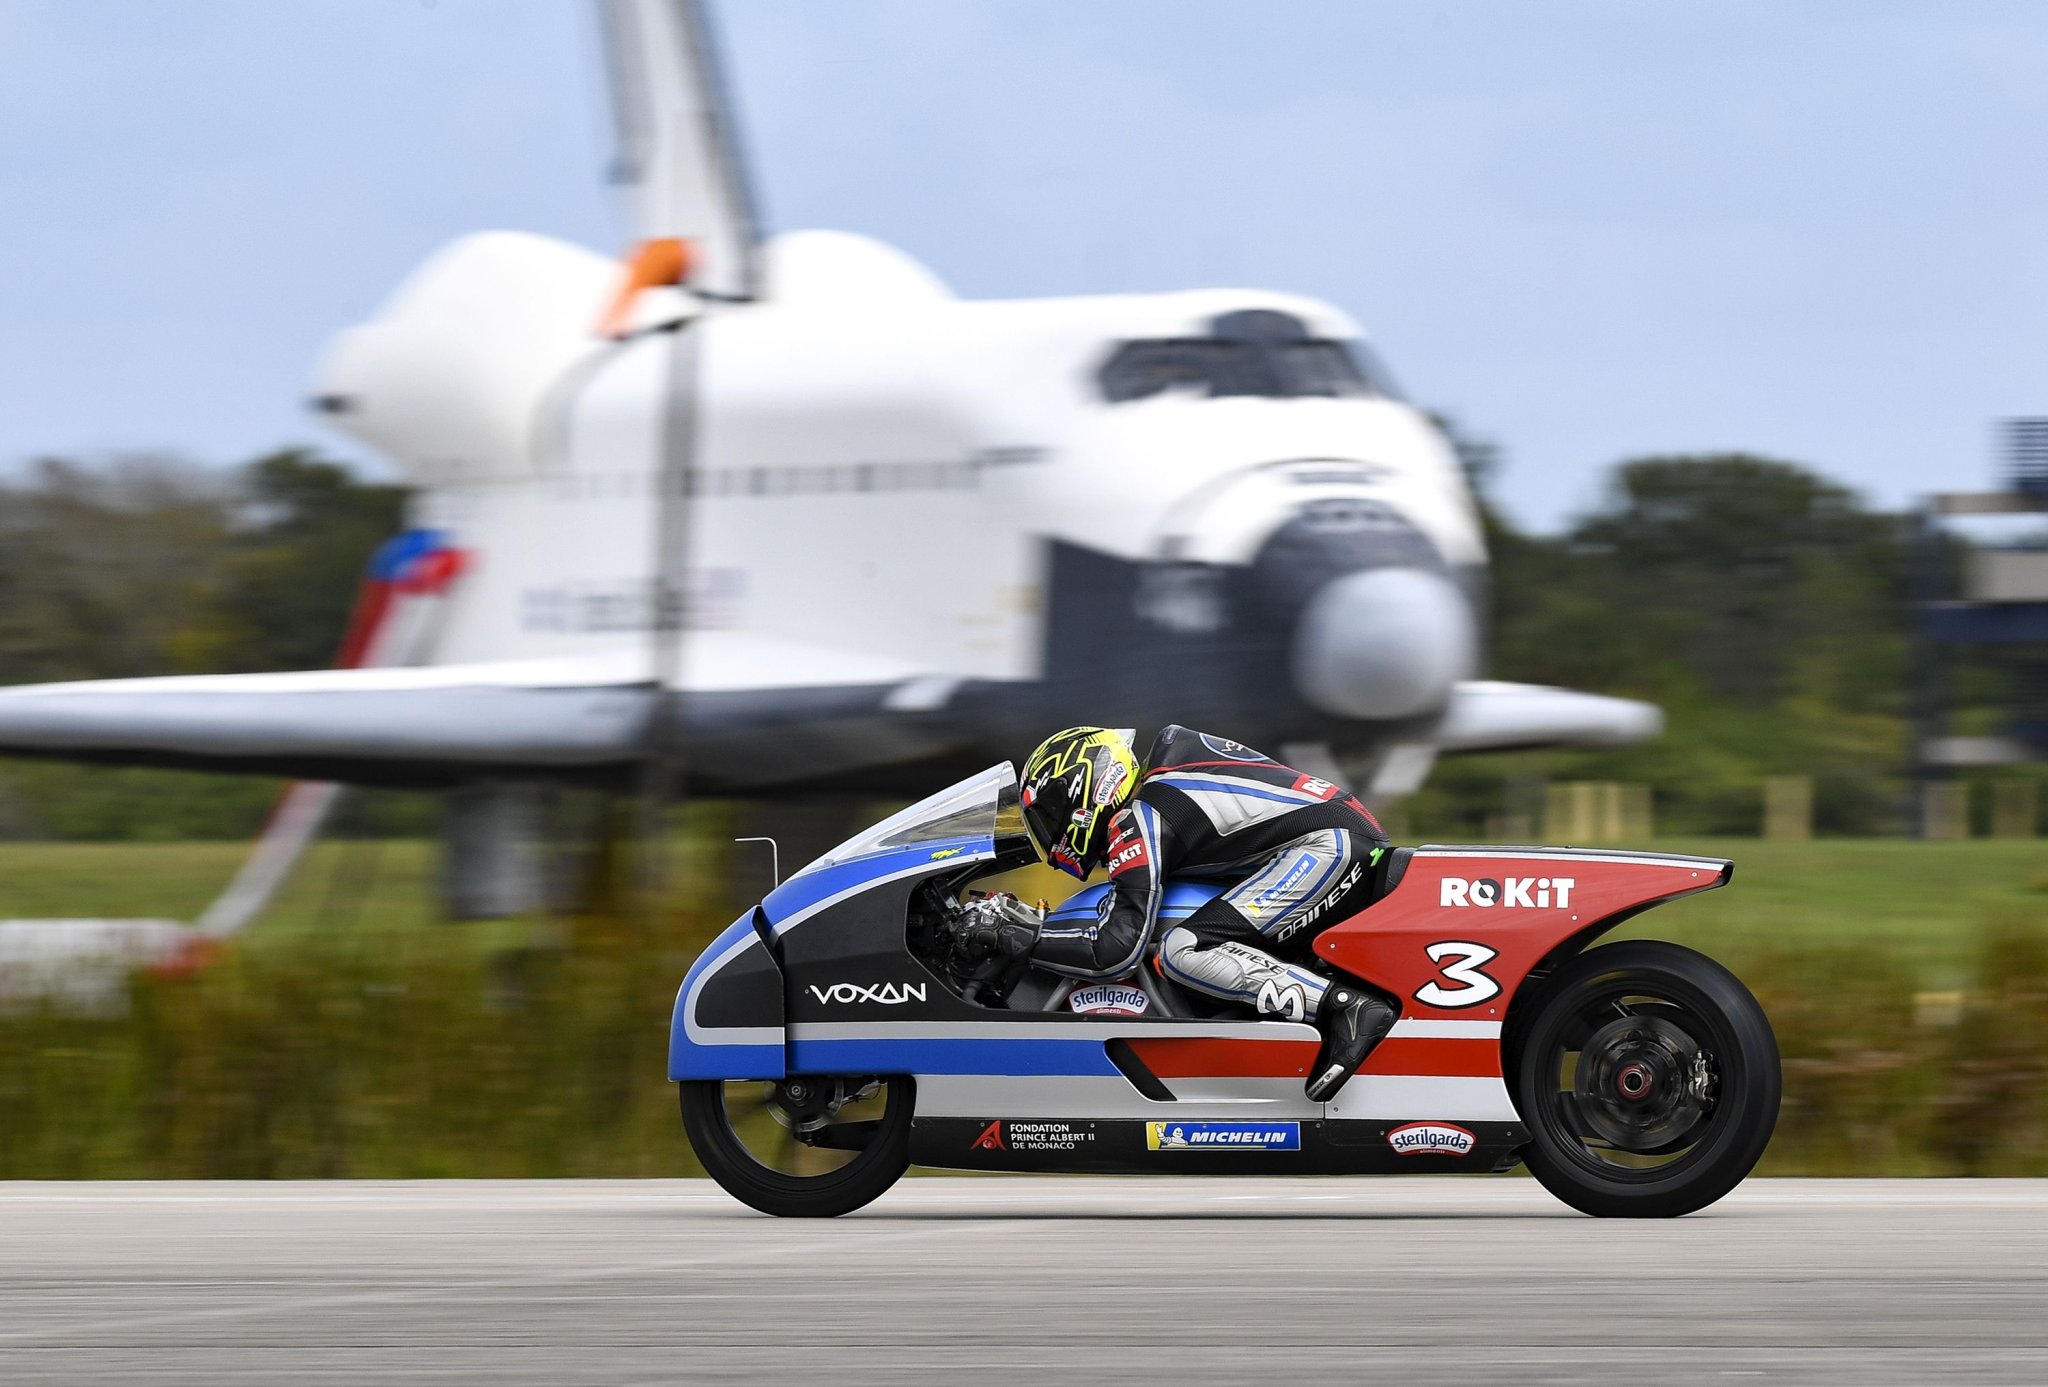 Max Biaggi Shatters EV Motorcycle Speed Record With 283 MPH Run